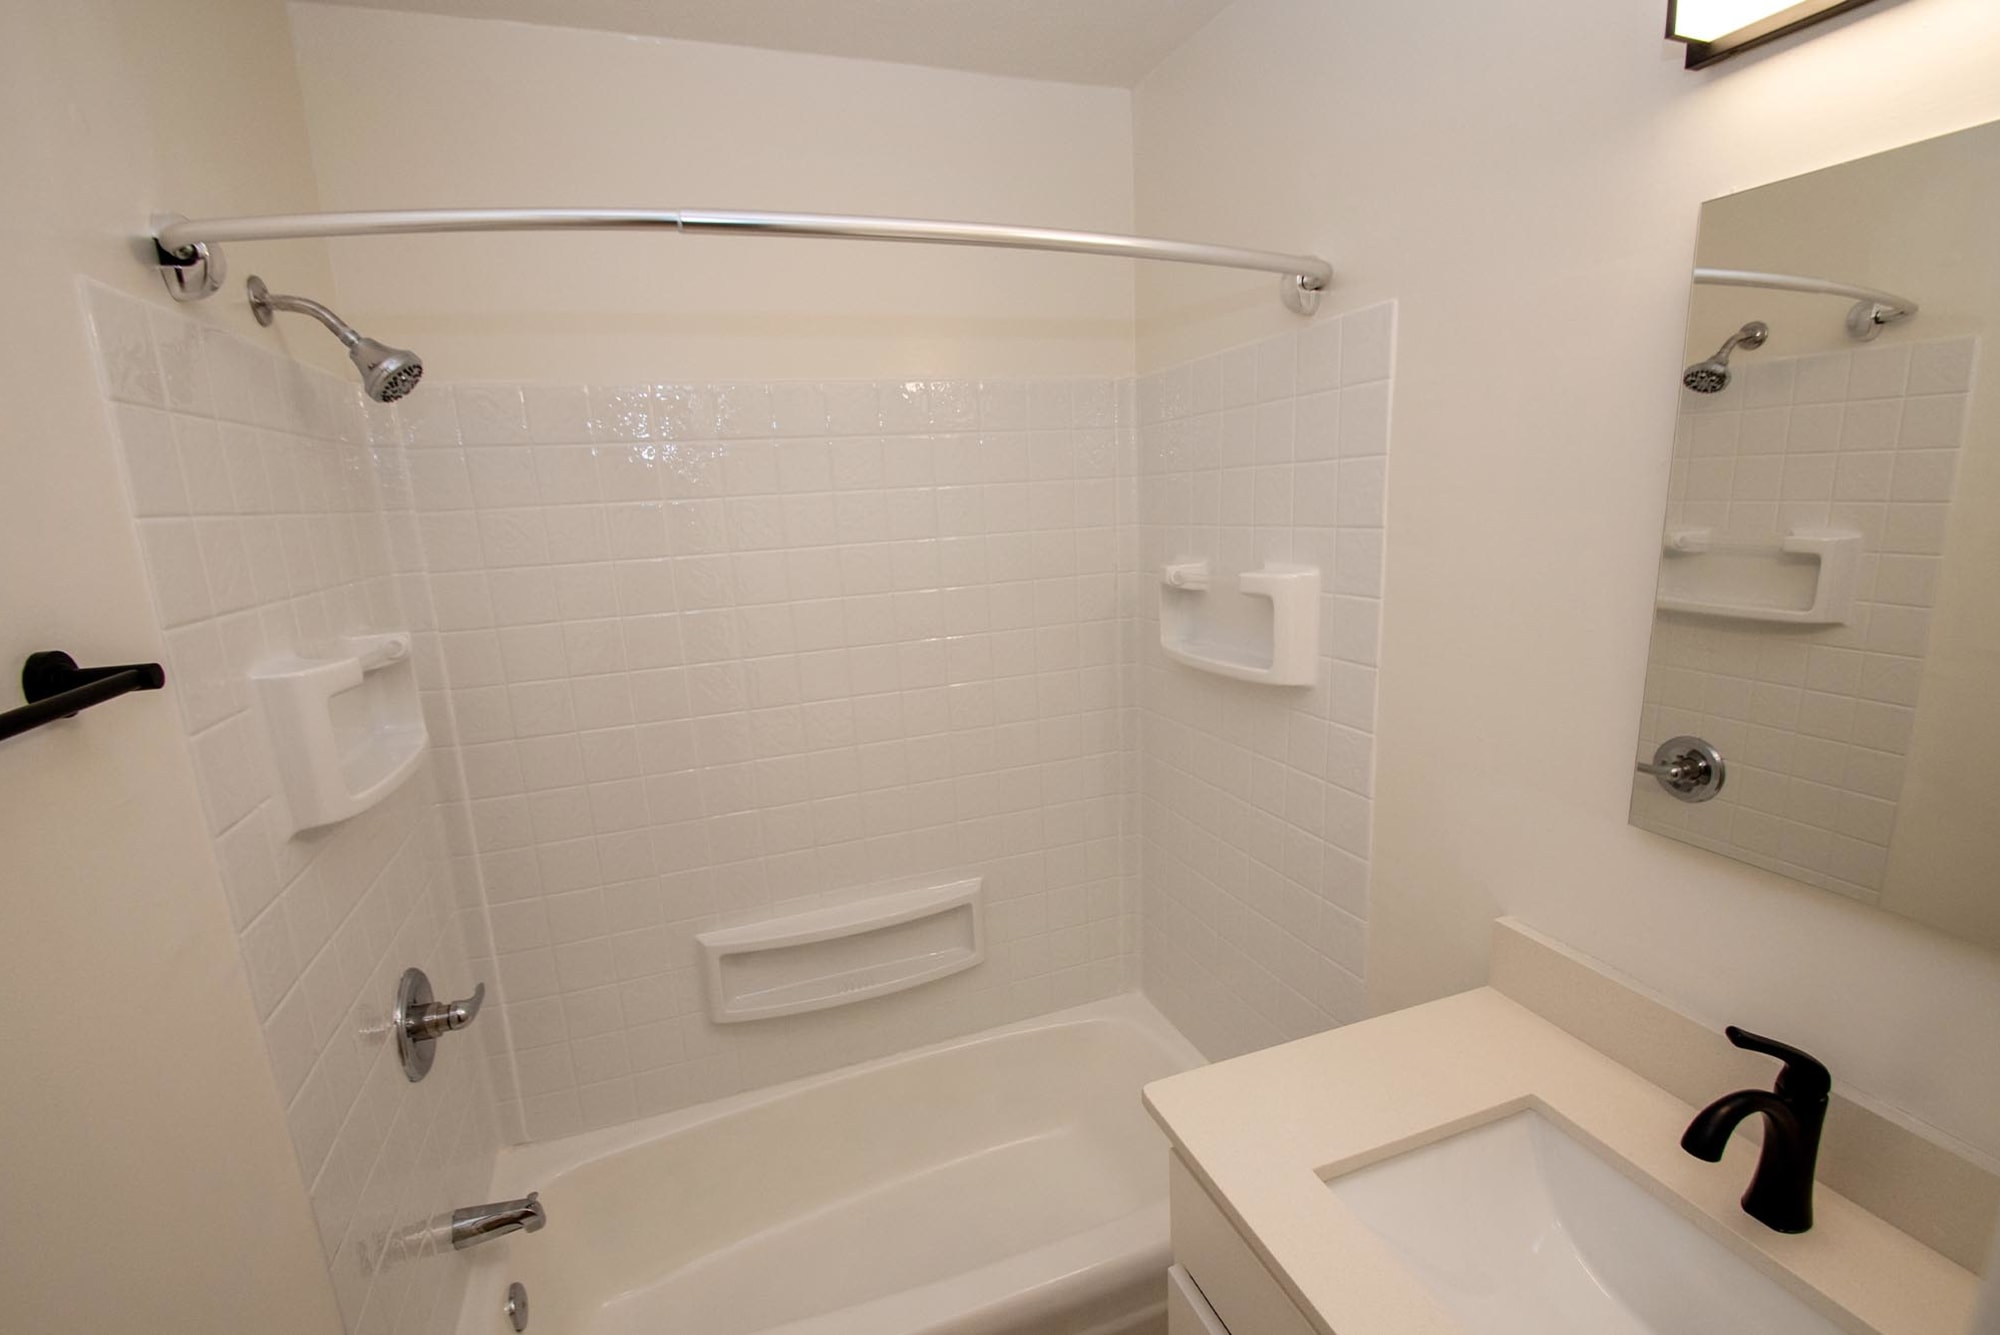 Renovated bathroom at Pointe at Northern Woods in Columbus, Ohio